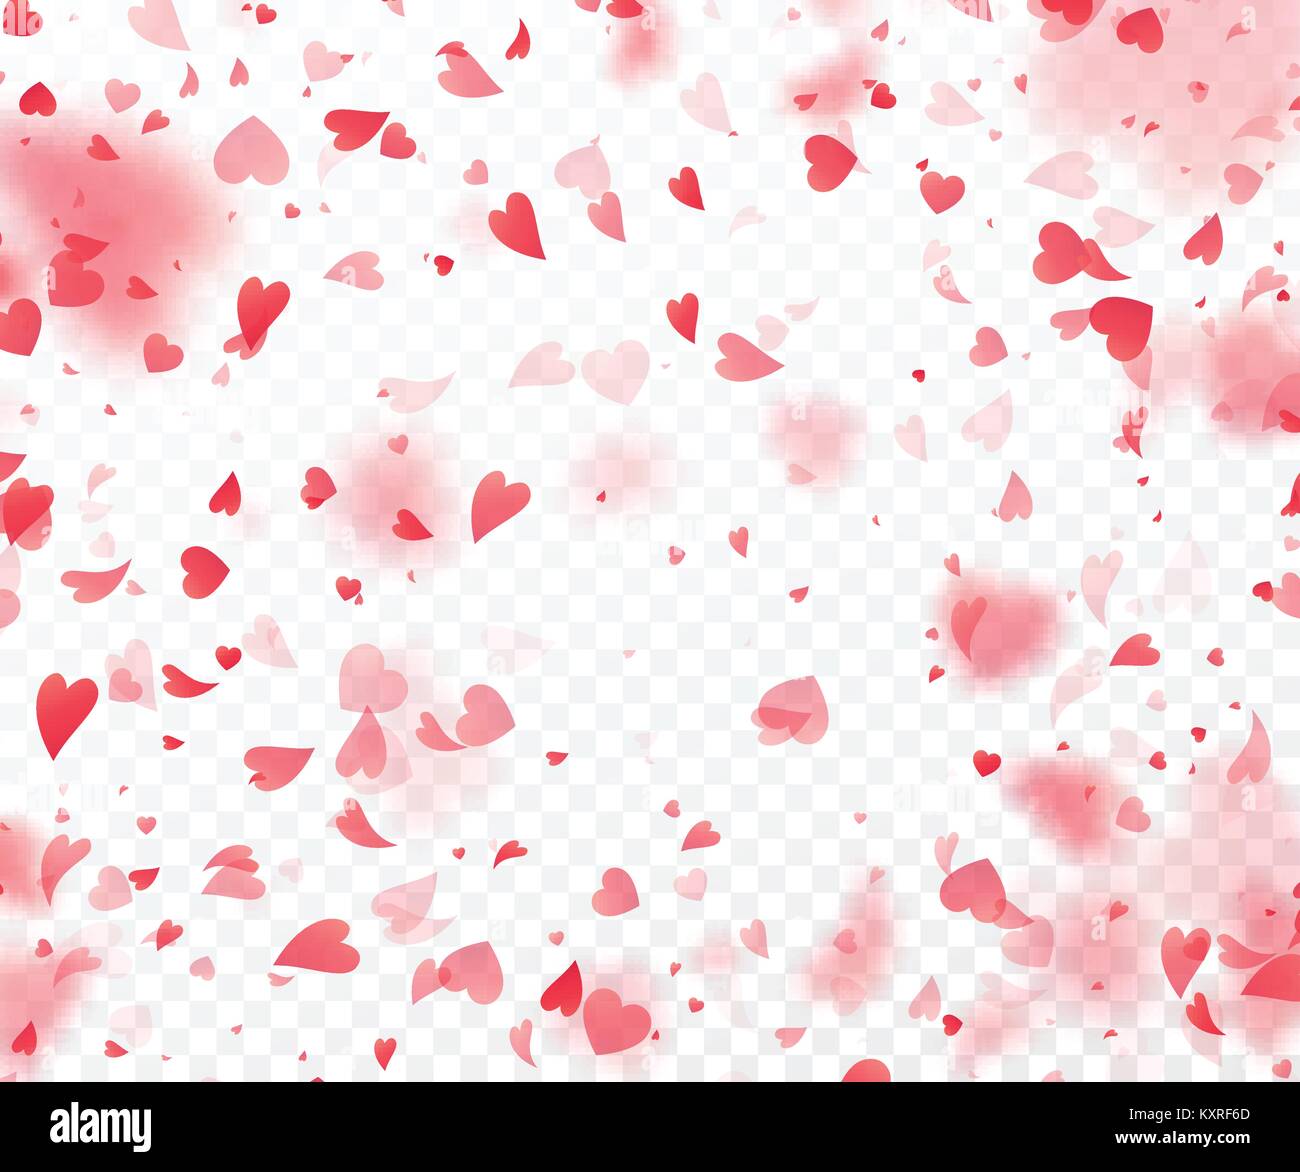 Heart confetti. Valentines, Womens, Mothers day background with falling red  and pink paper hearts, petals. Greeting wedding card. February 14,  love.White background. Stock Vector by ©floral_set 179027558